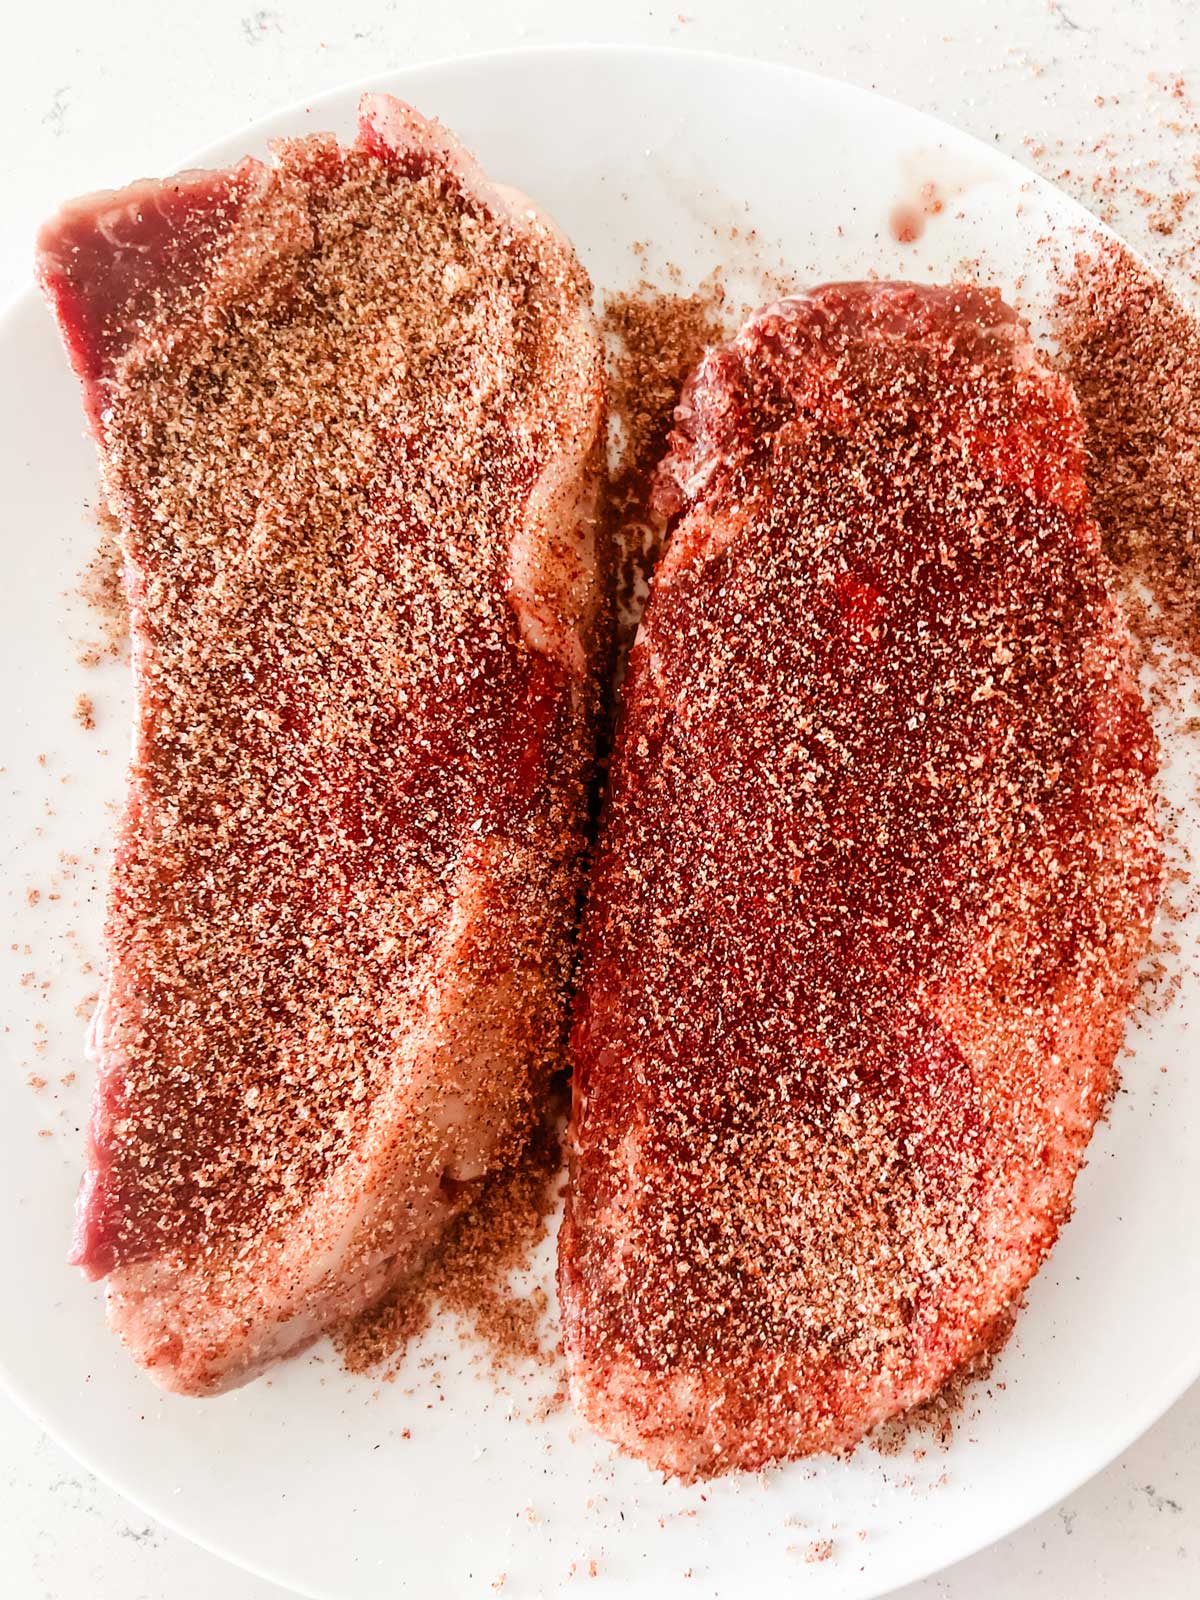 Photo of Ninja Foodi Steaks that have been seasoned and are resting on a plate.